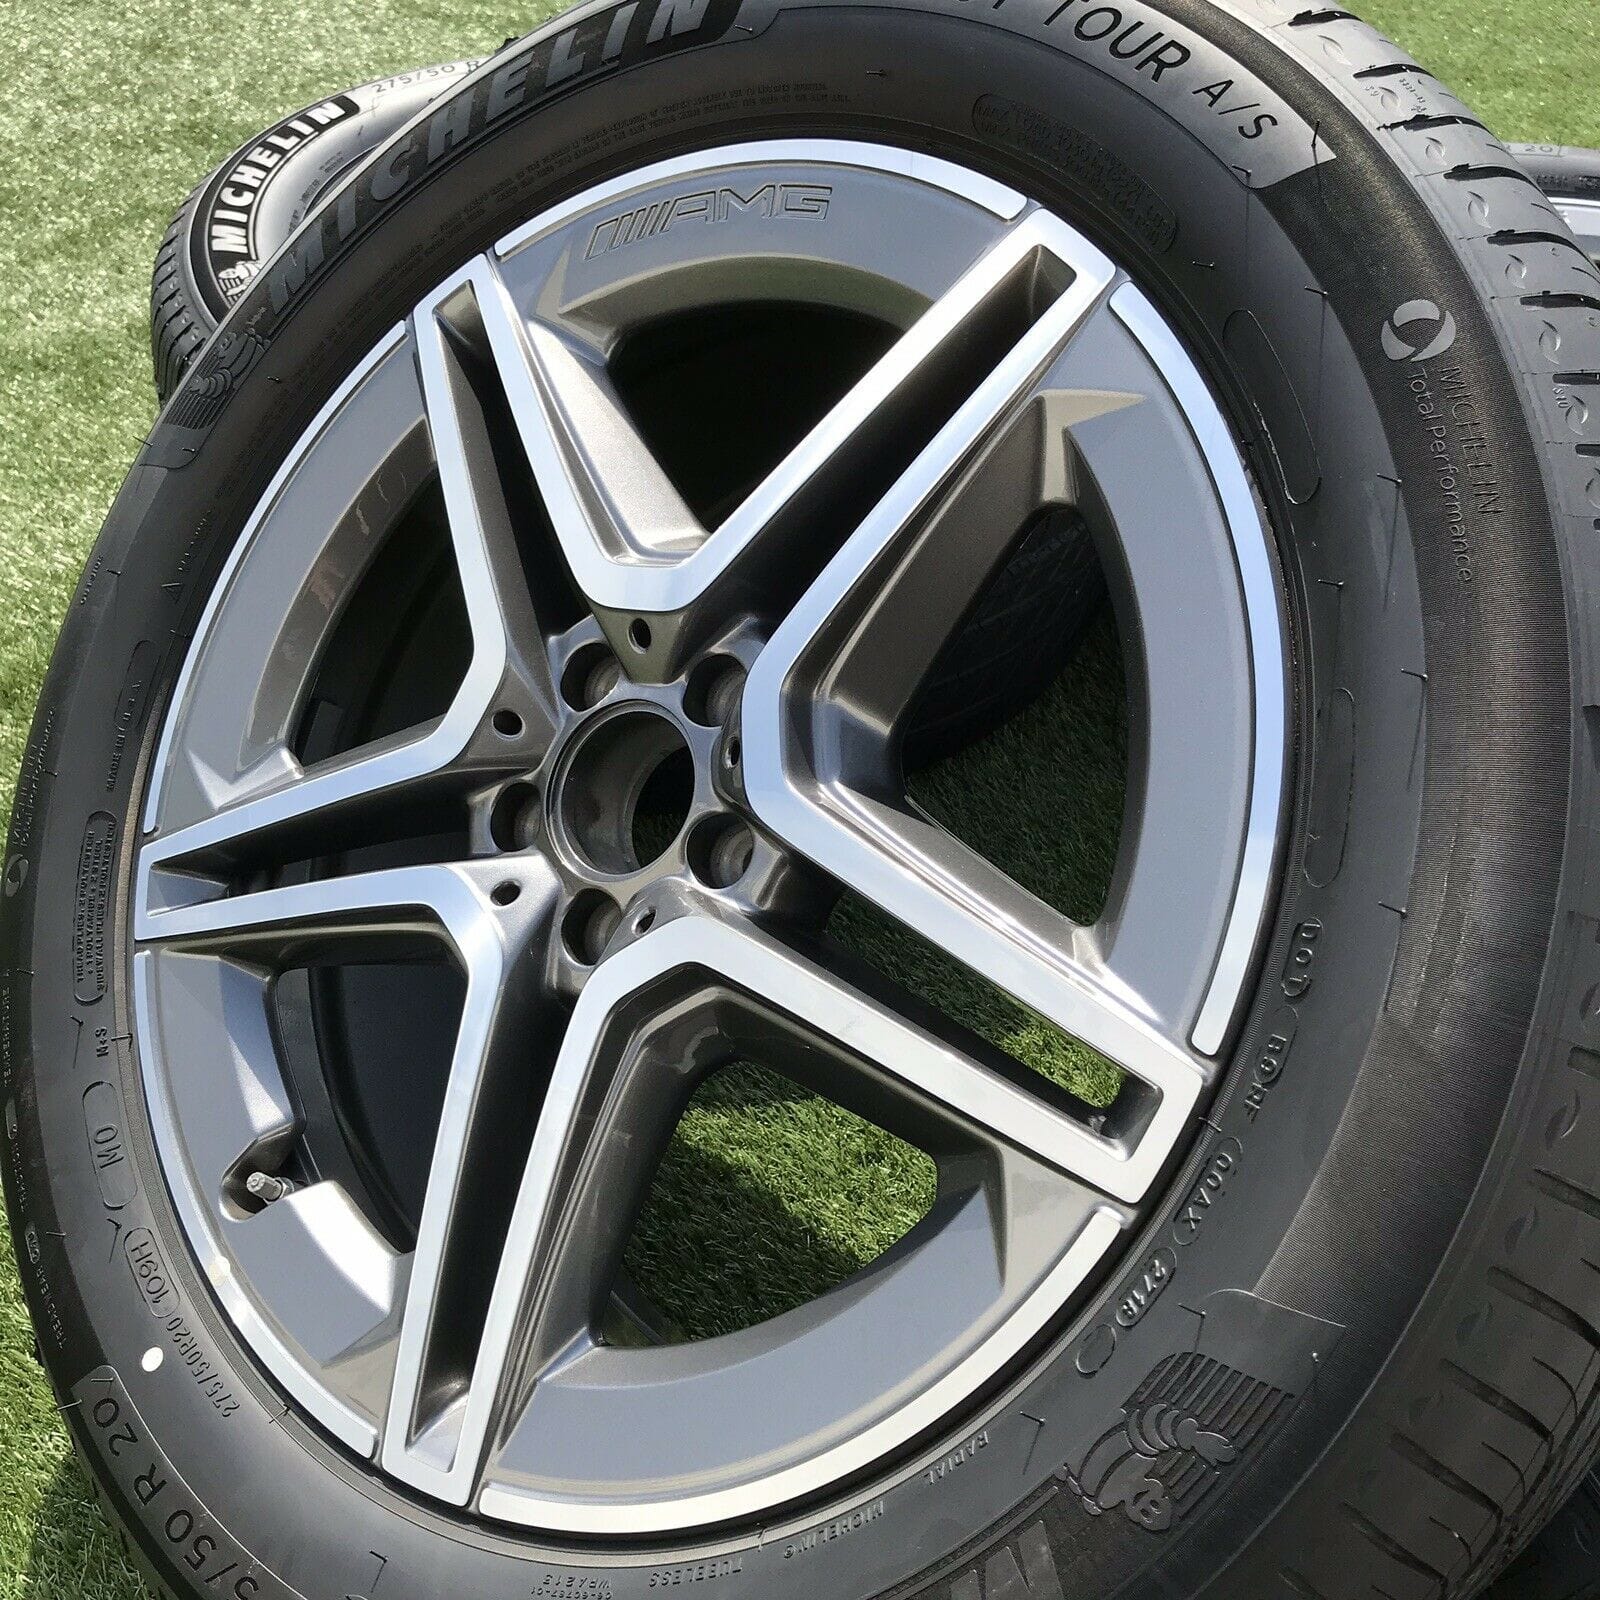 Wheels and Tires/Axles - Wheels and Tires - New - 2015 to 2018 Mercedes-Benz 450SEL - 2015 to 2018 Mercedes-Benz 450SEL - San Antonio, TX 78299, United States